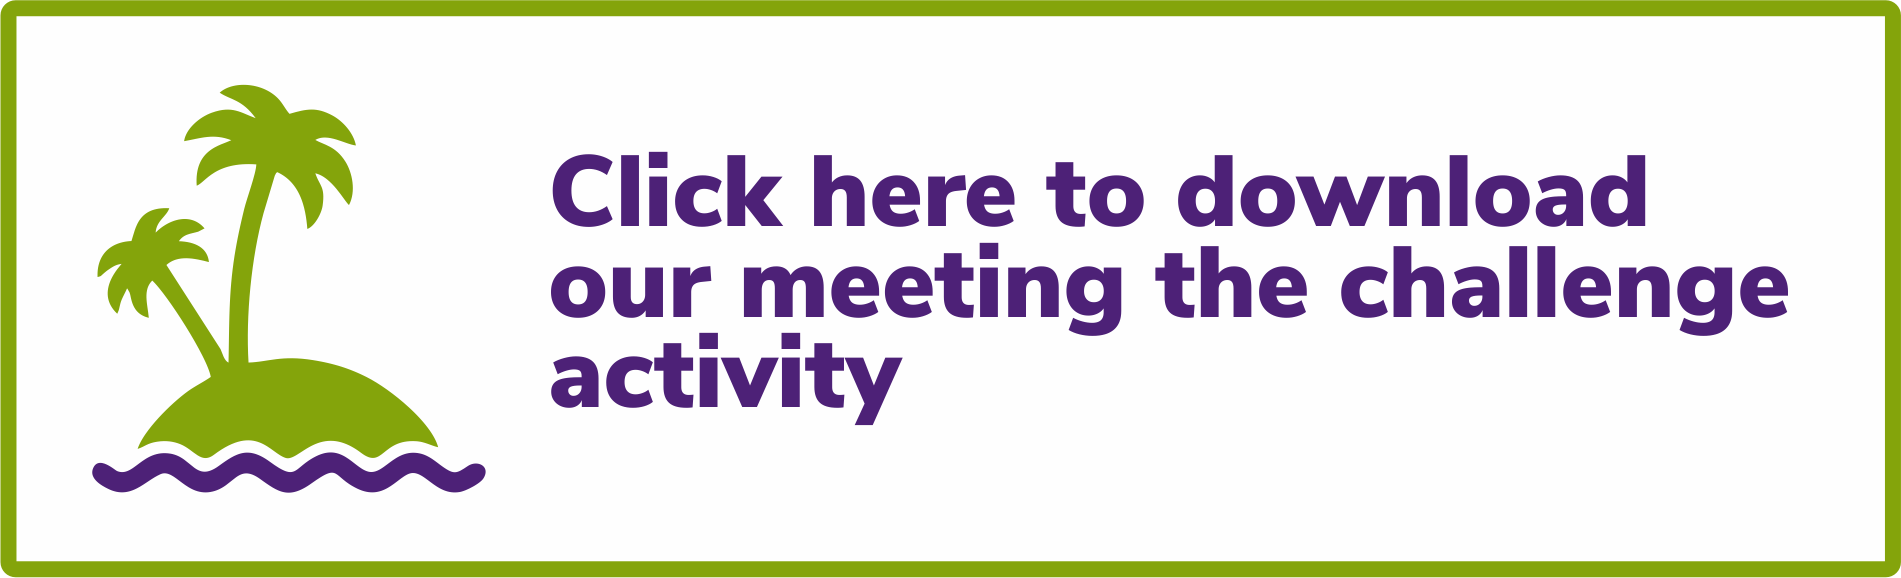 Click here to download our meeting the challenge activity